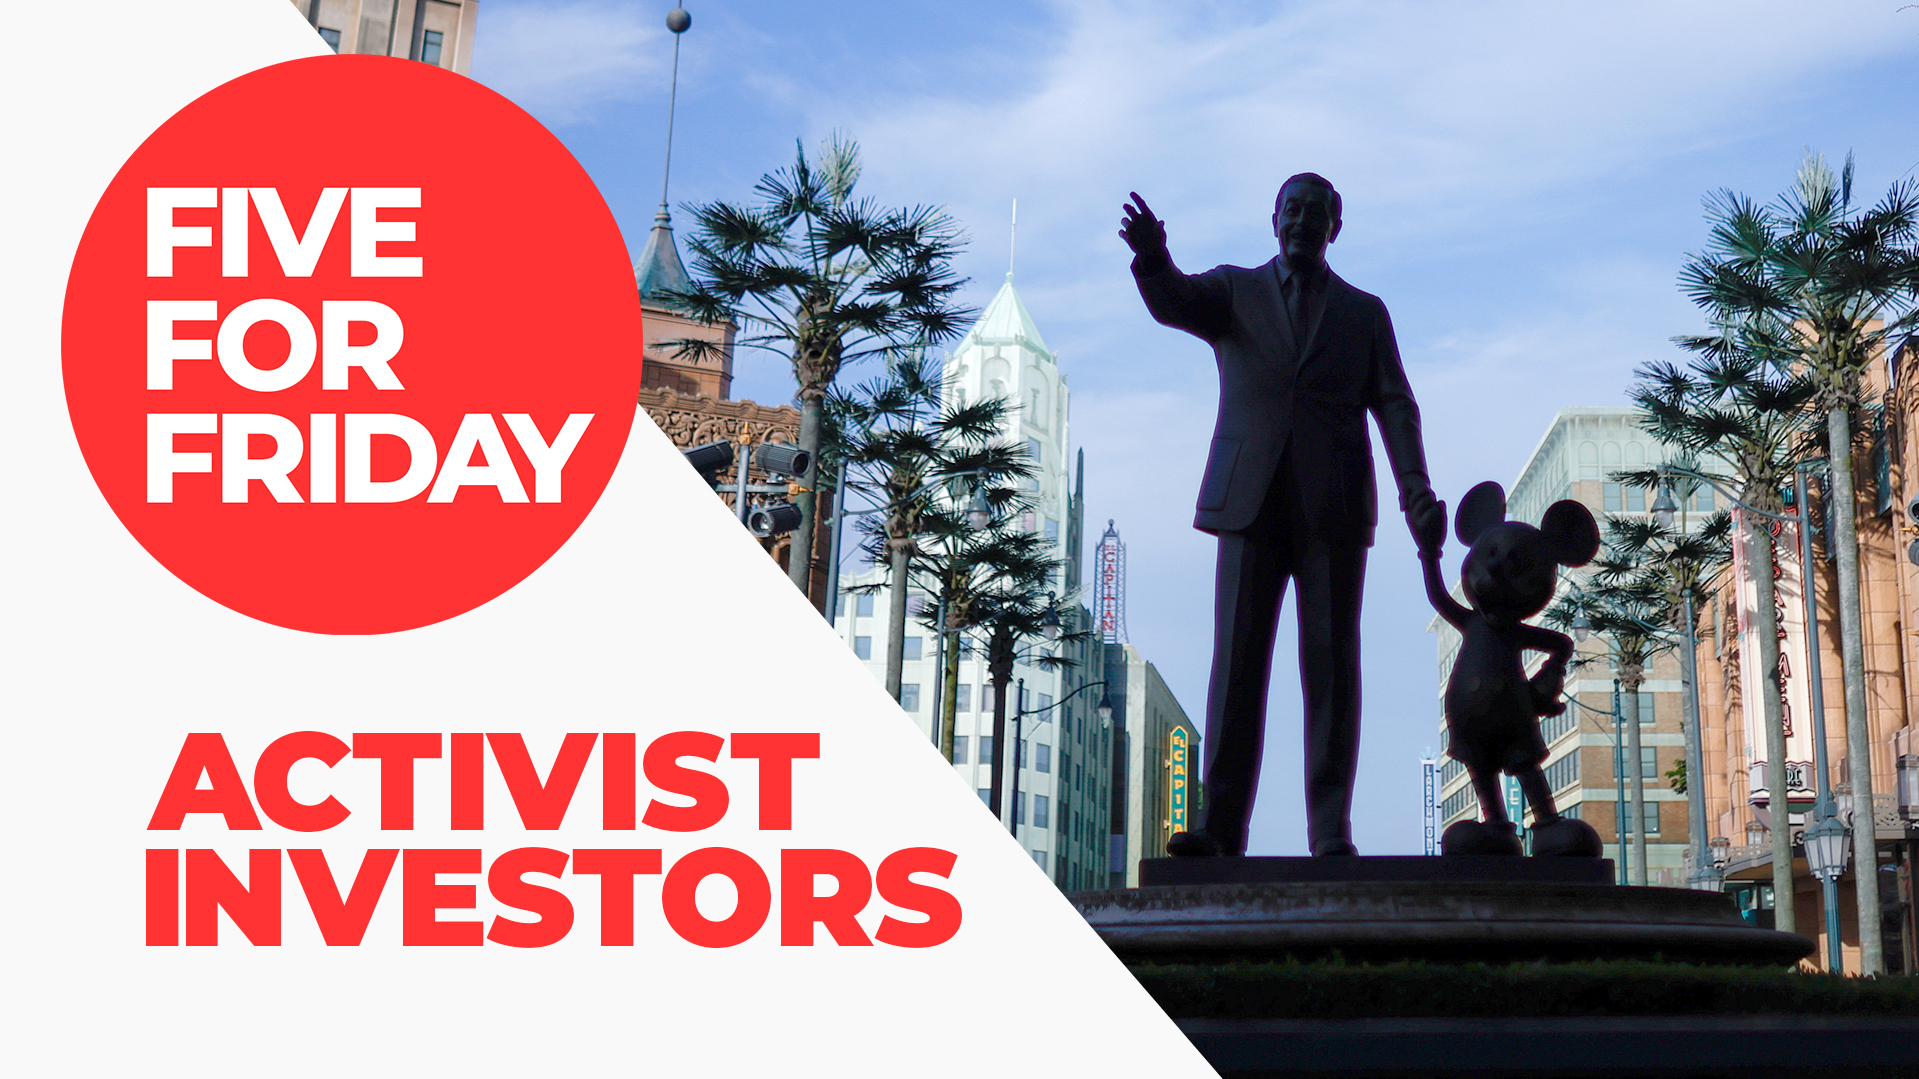 When activist investors take a major stake in a firm, things are bound to get rocky. We have five companies facing activist investors.